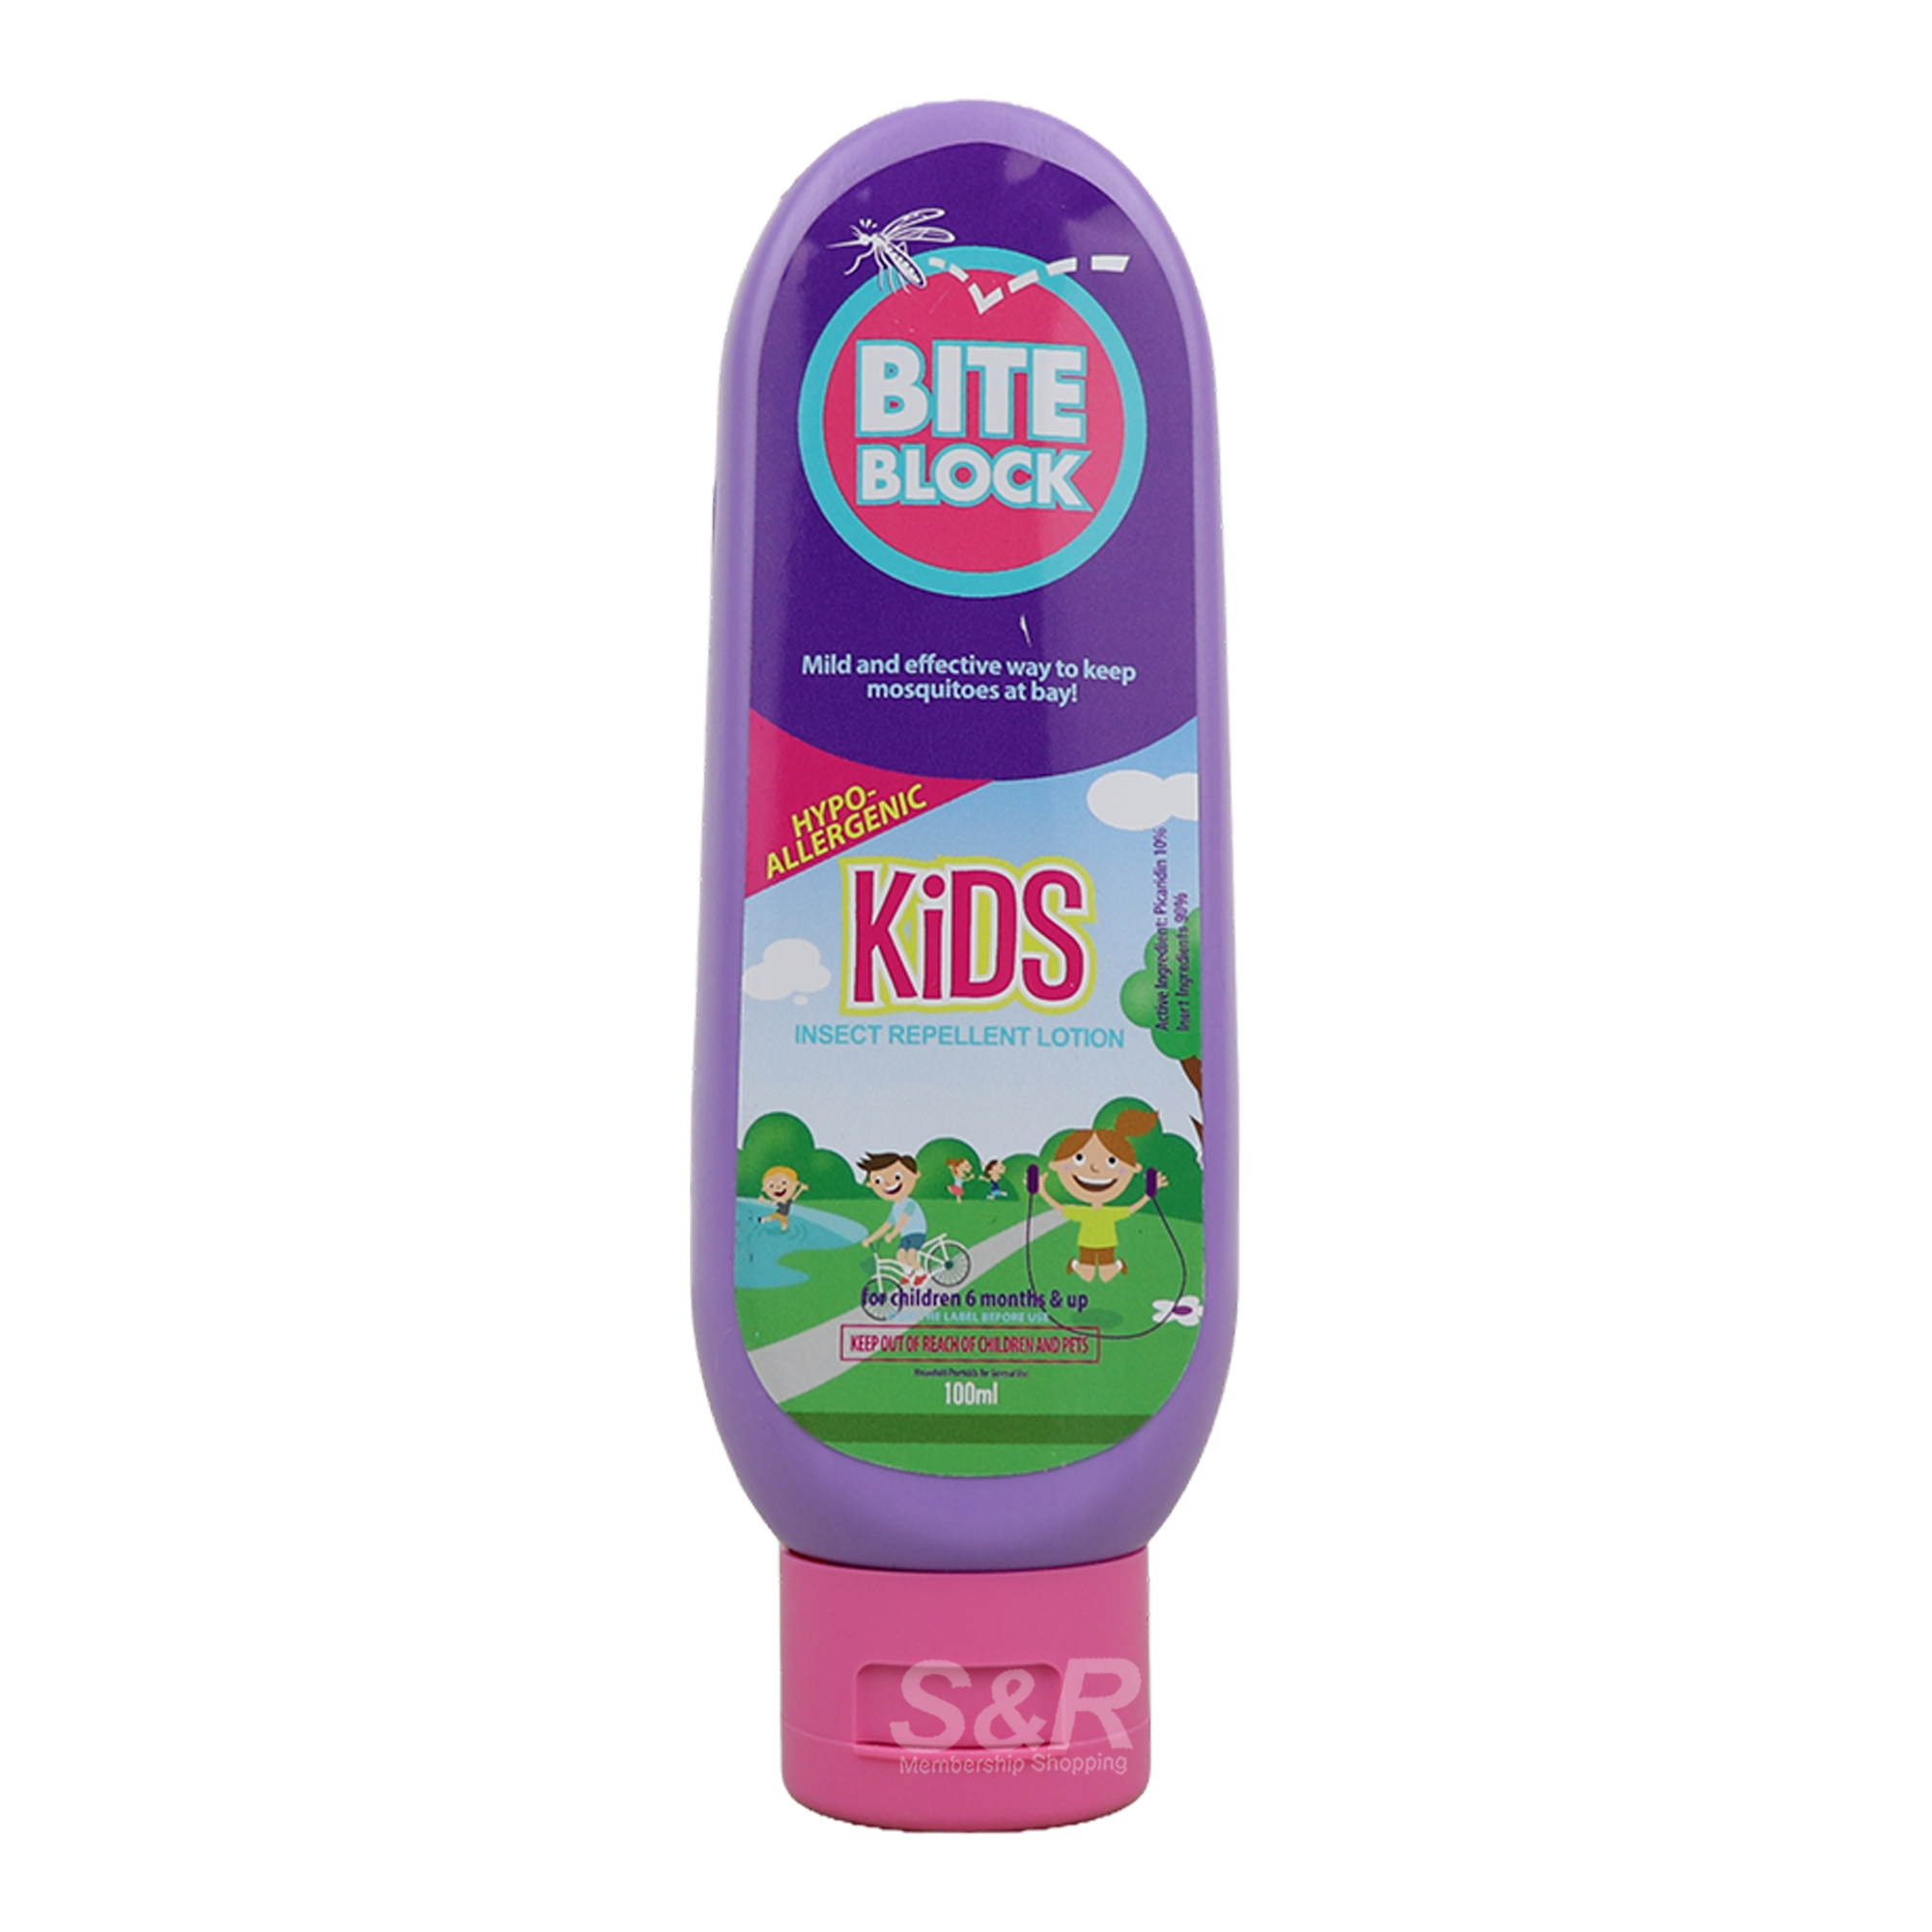 Bite Block Insect Repellent Lotion for Kids 100mL